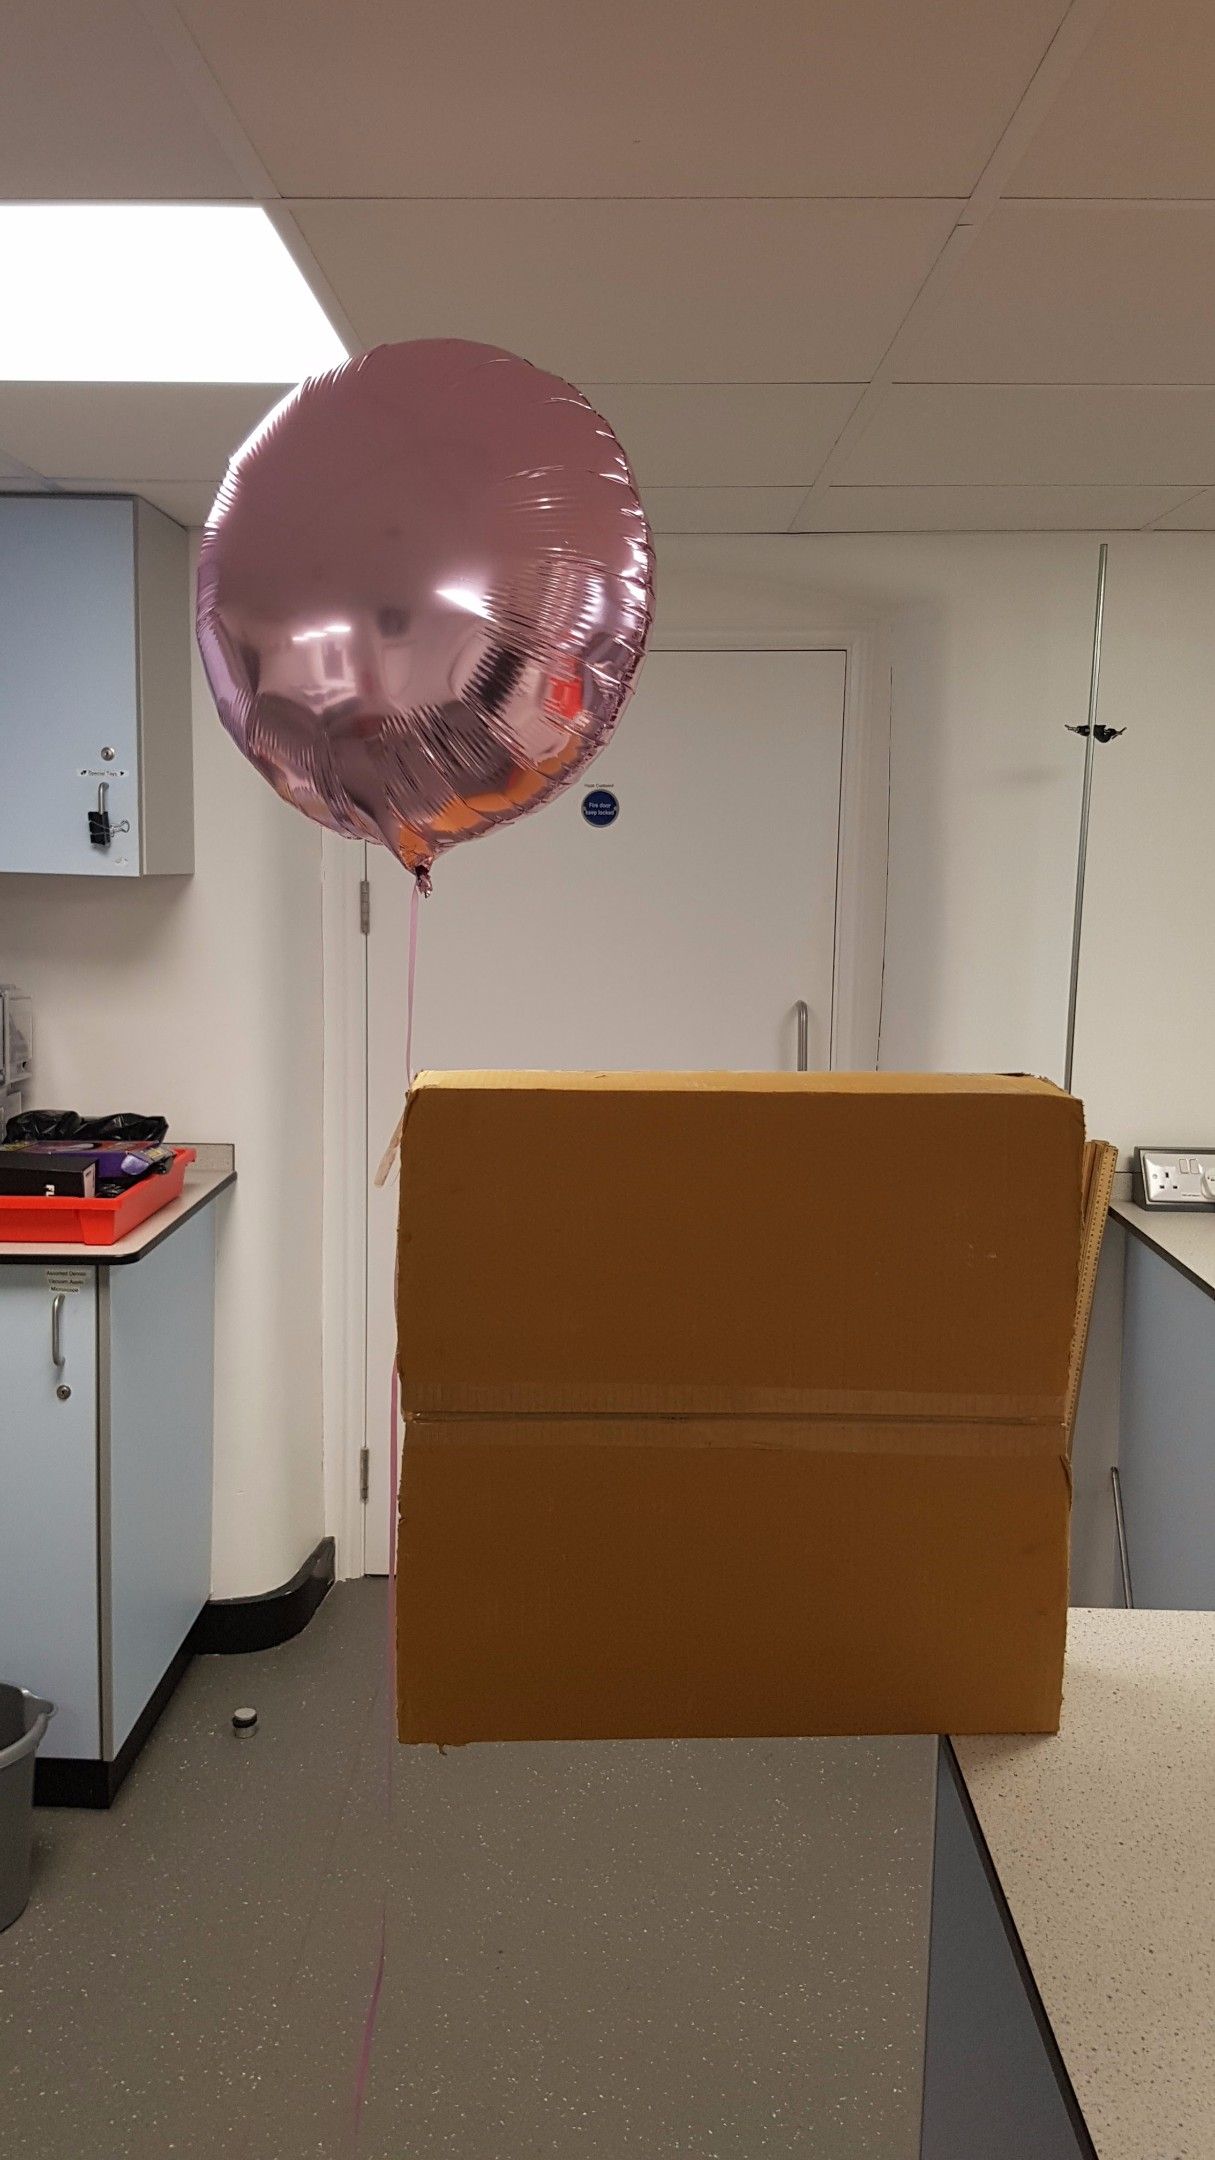 A pink balloon on a box Description automatically generated